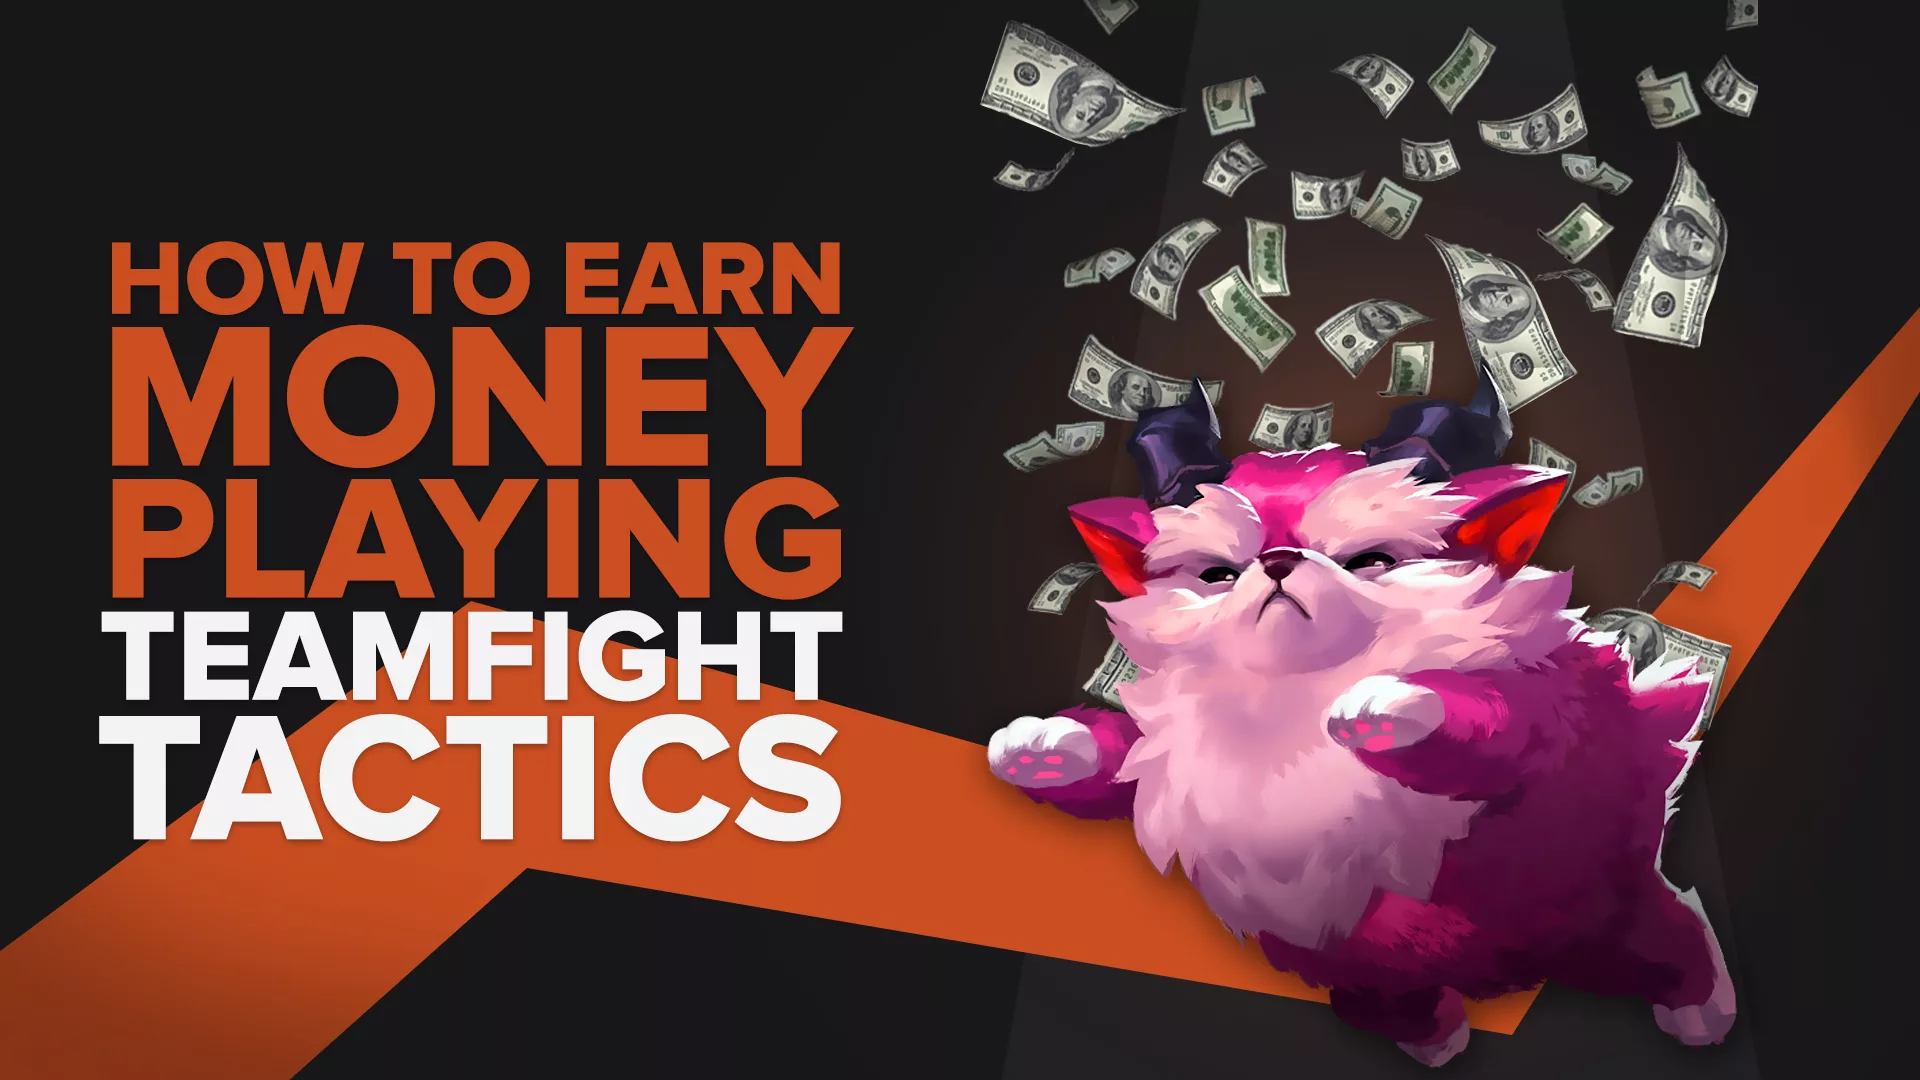 How To Earn Money Playing Teamfight Tactics